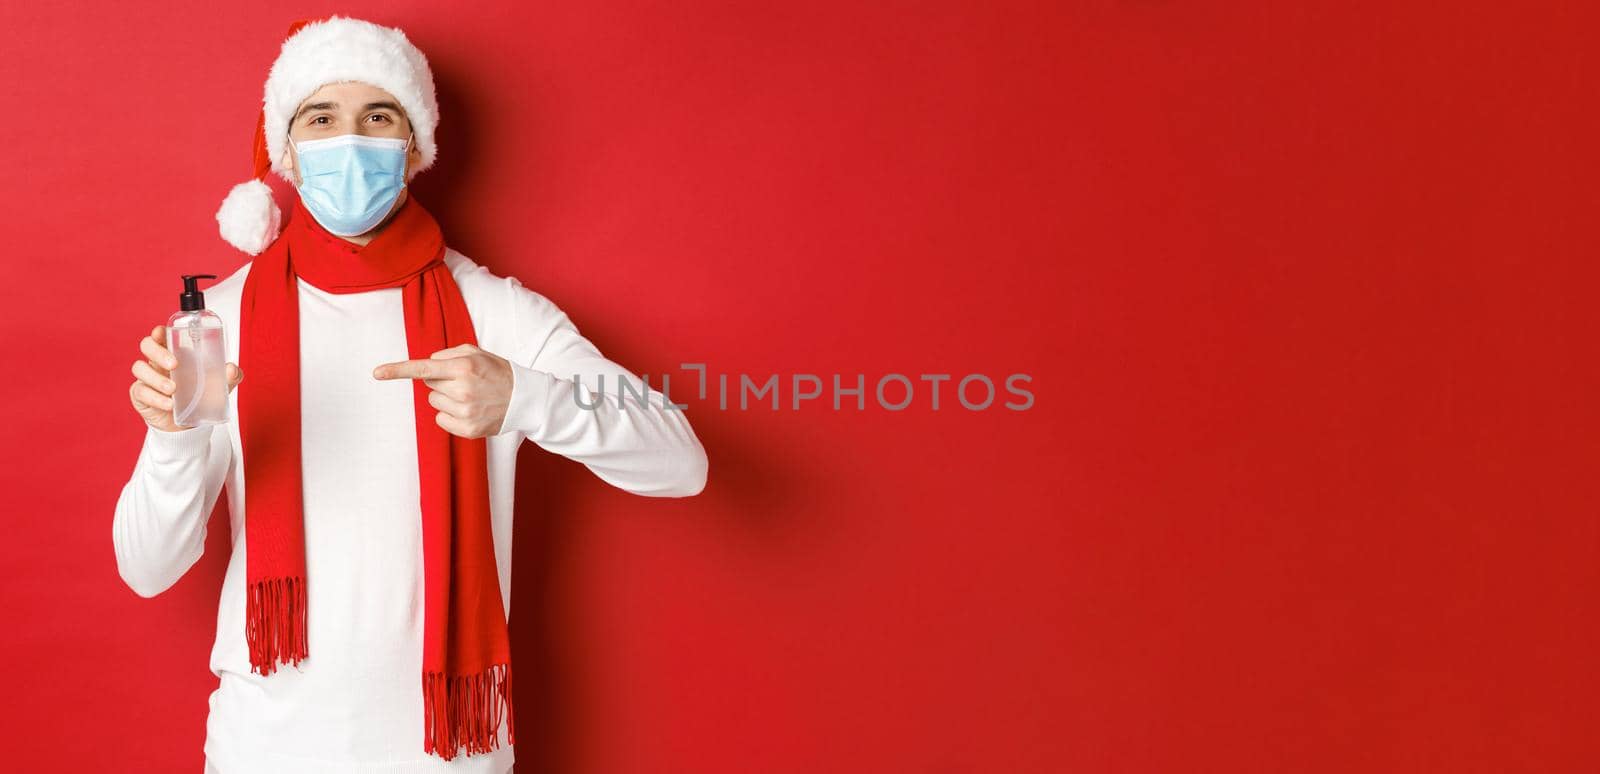 Concept of covid-19, christmas and holidays during pandemic. Handsome happy man in santa hat and medical mask, recommending use hand sanitizer, standing over red background.